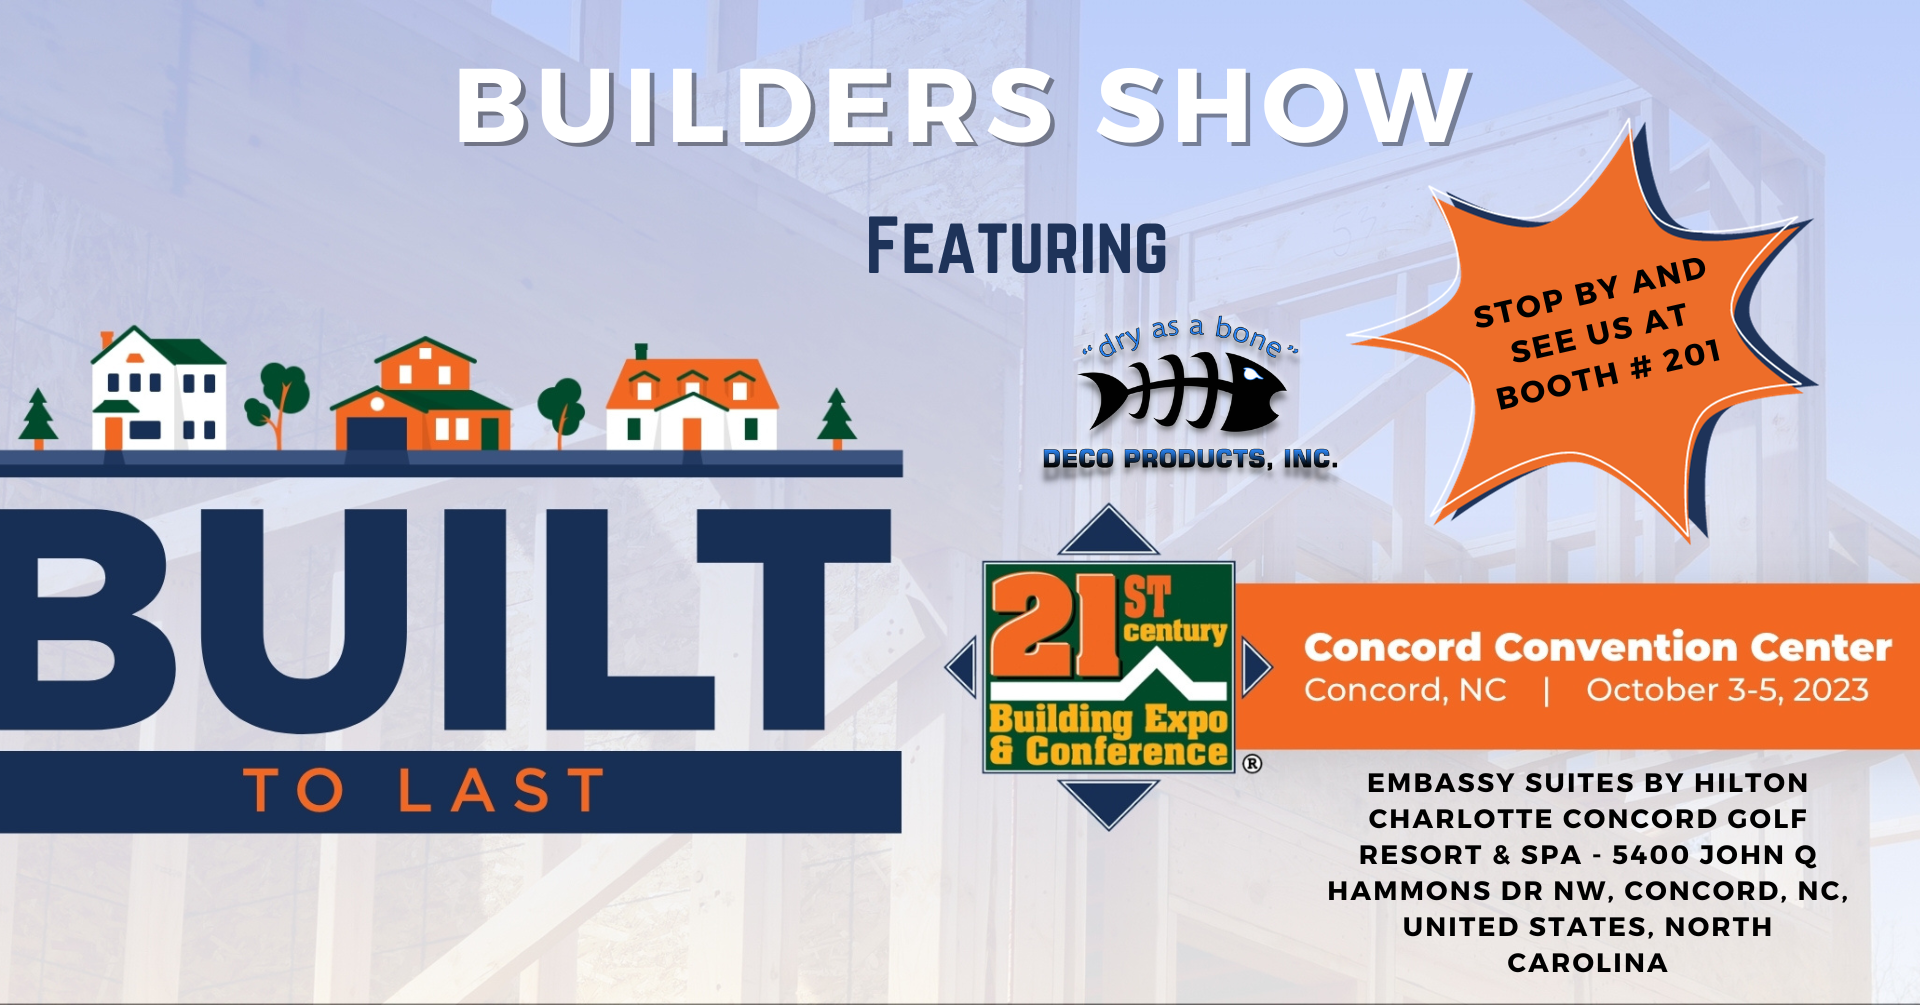 poster promoting a builders show